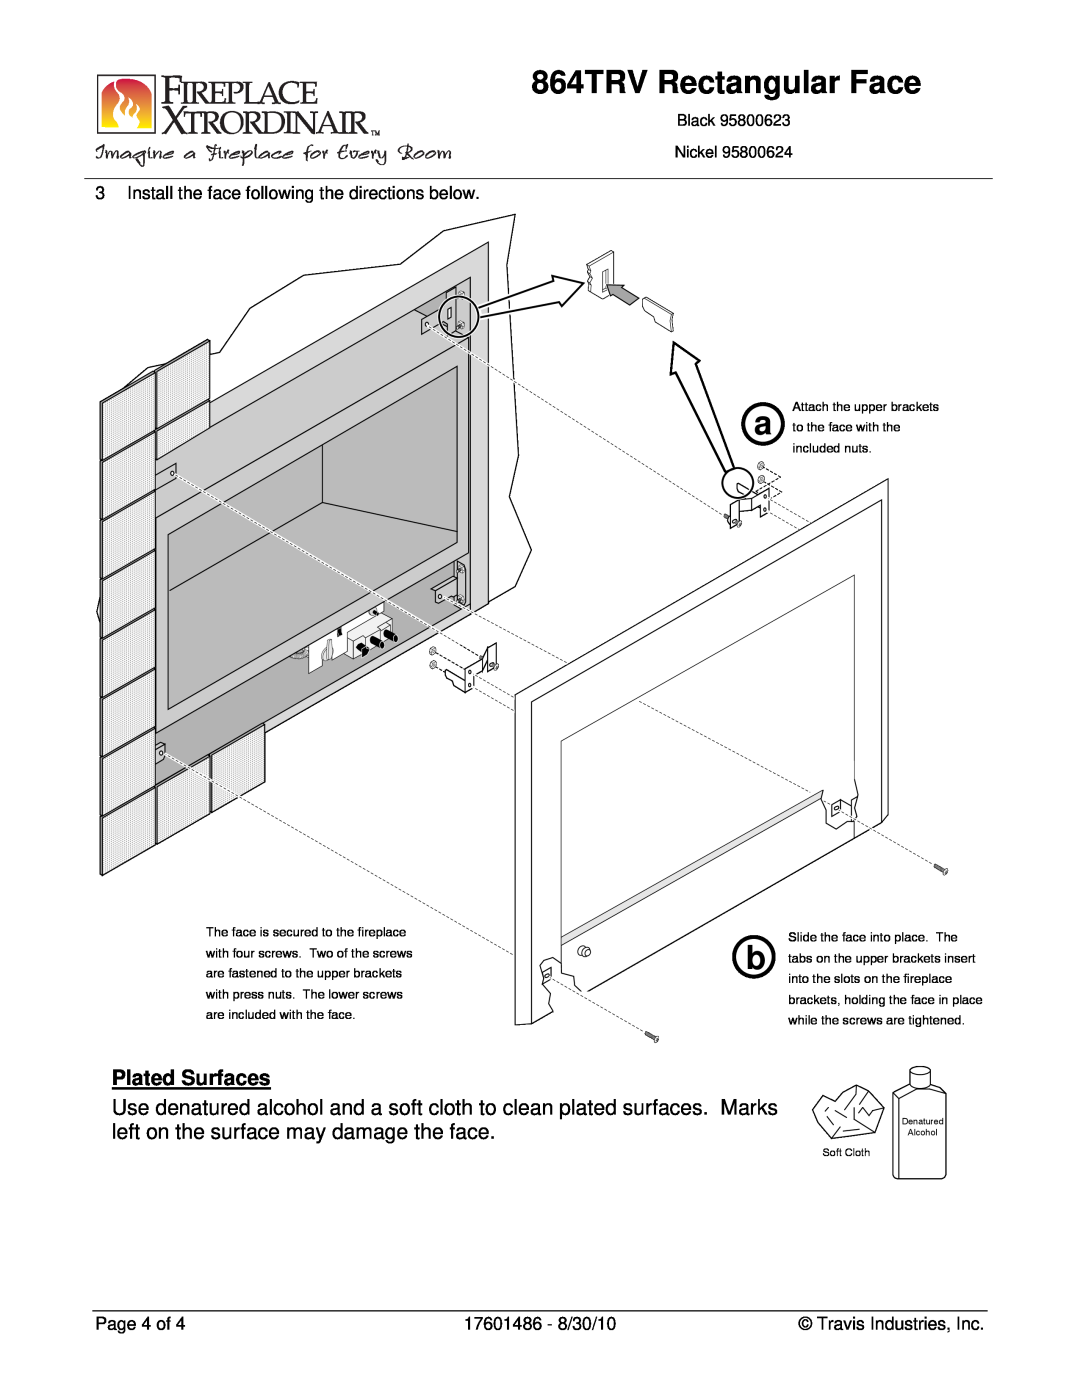 FireplaceXtrordinair 95800624 Plated Surfaces, Install the face following the directions below, Page 4 of, Black Nickel 